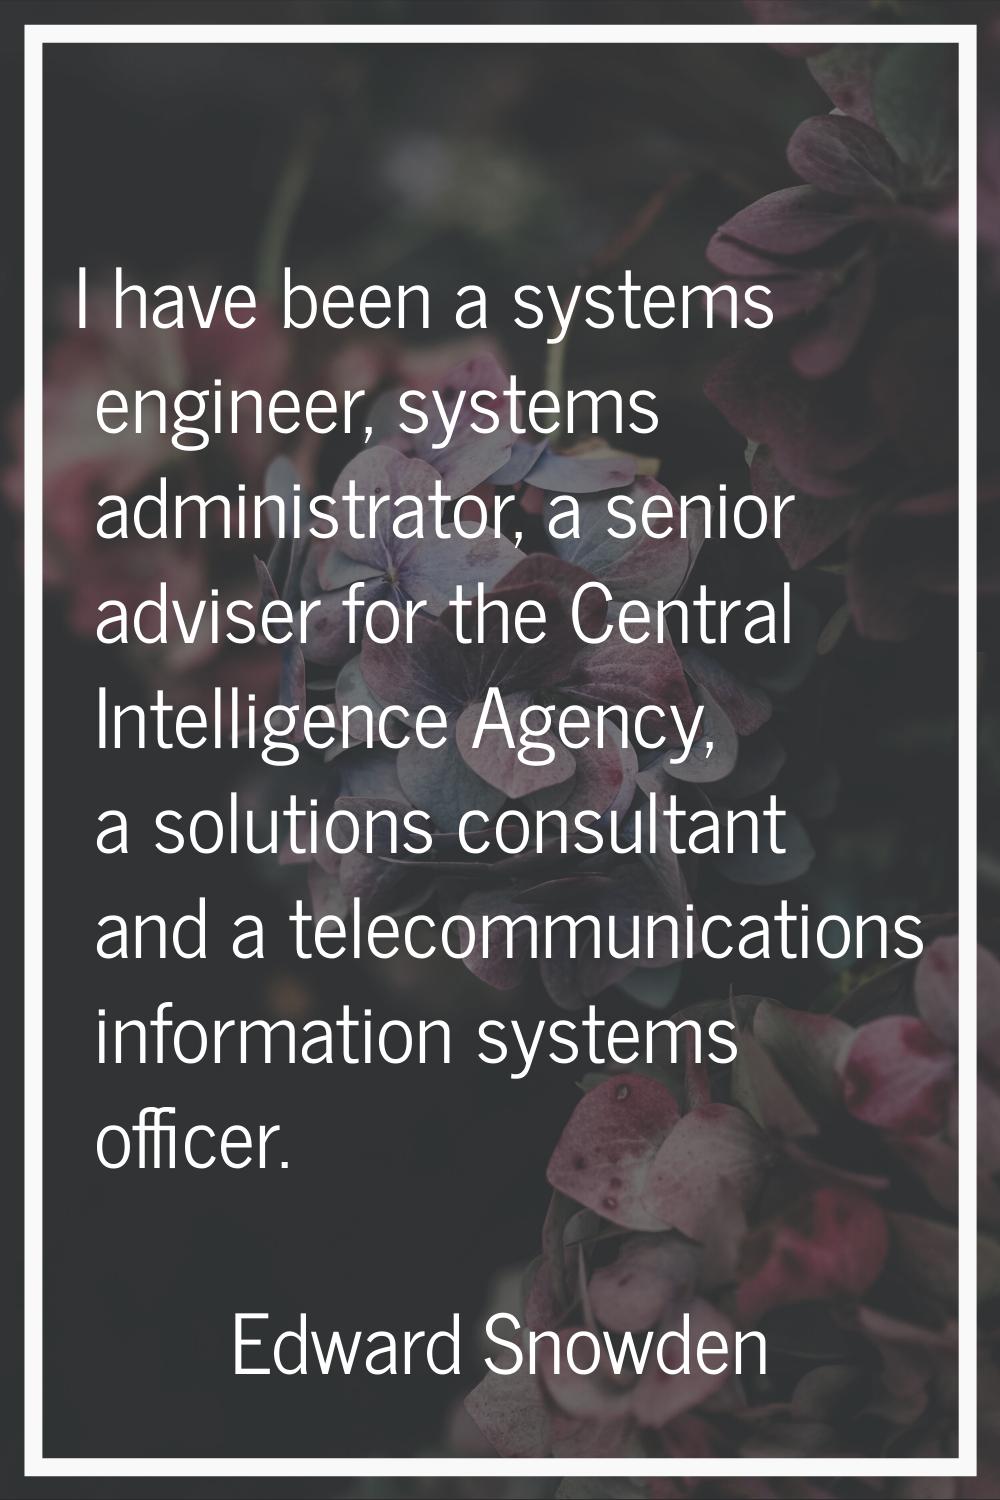 I have been a systems engineer, systems administrator, a senior adviser for the Central Intelligenc